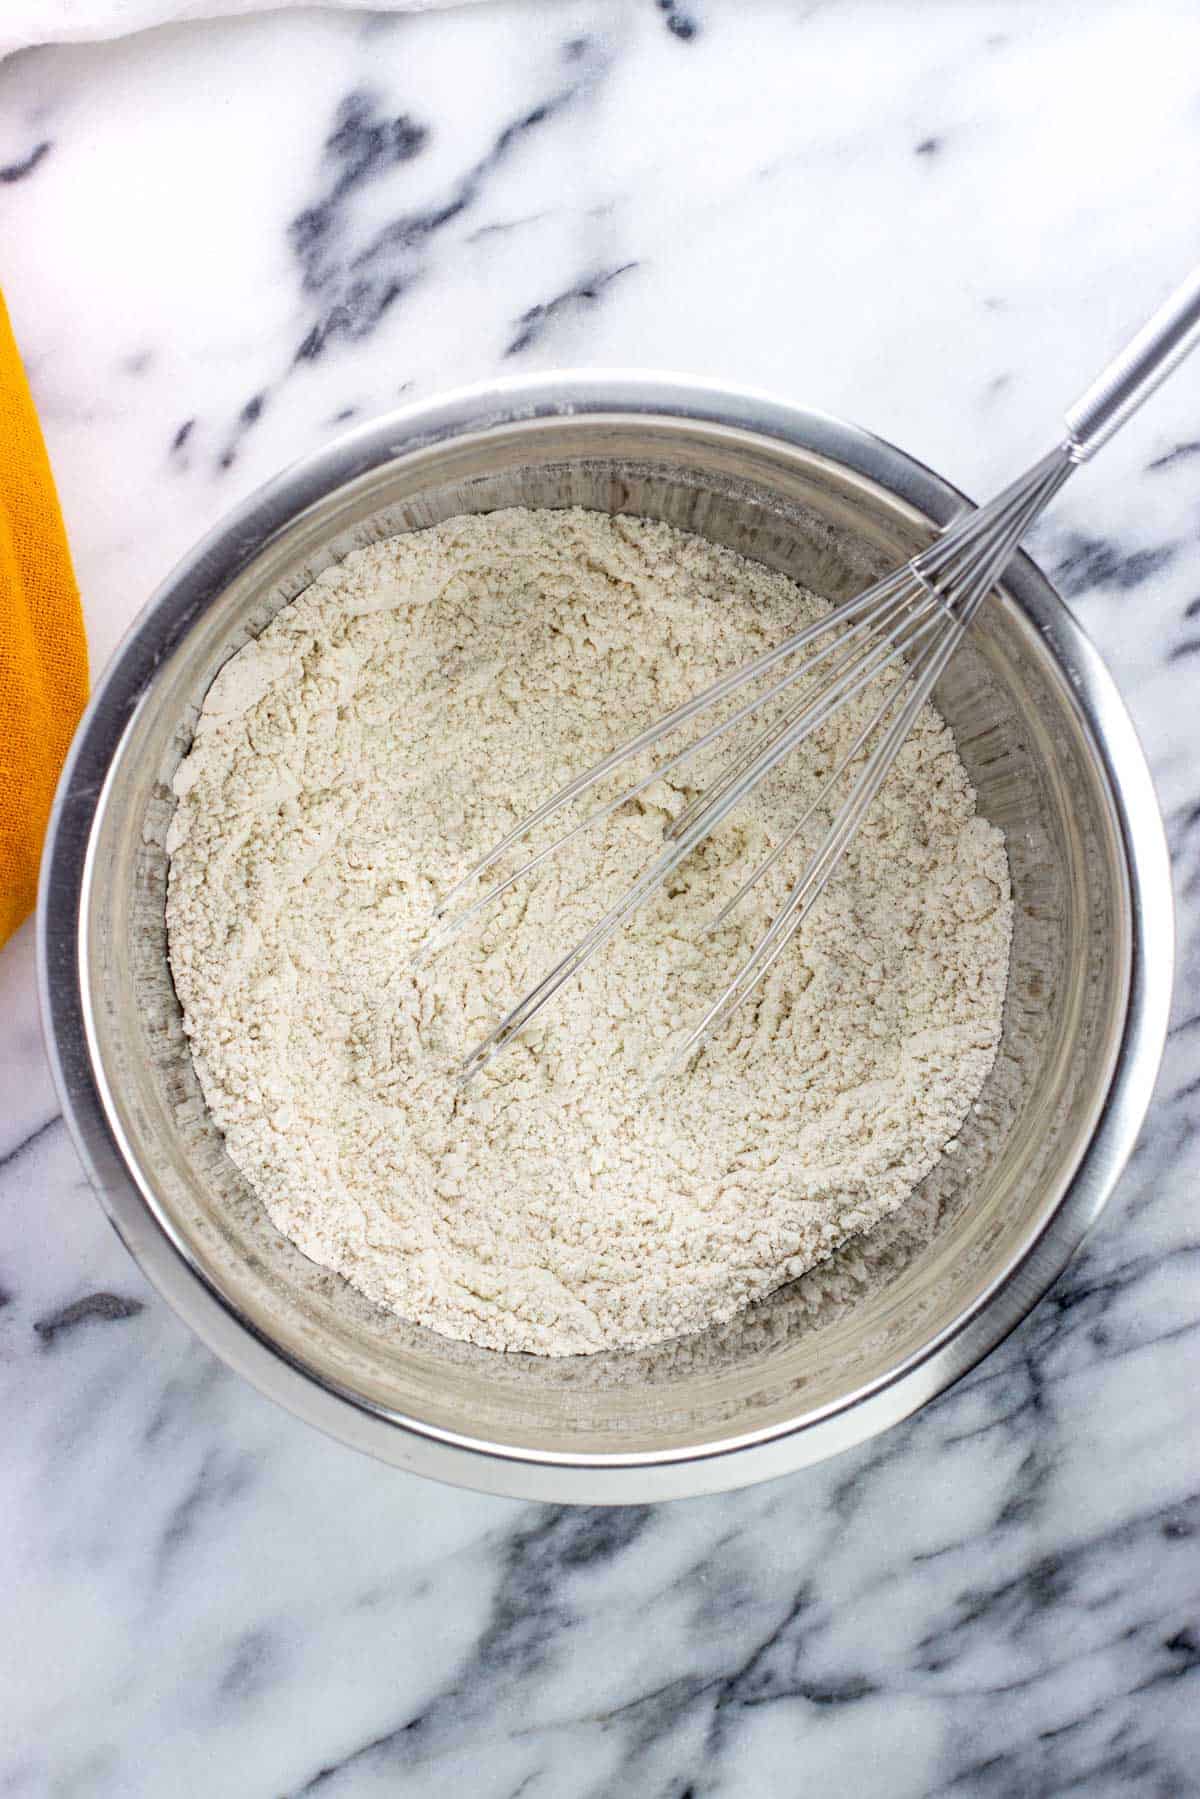 Dry ingredients whisked together in a separate bowl.